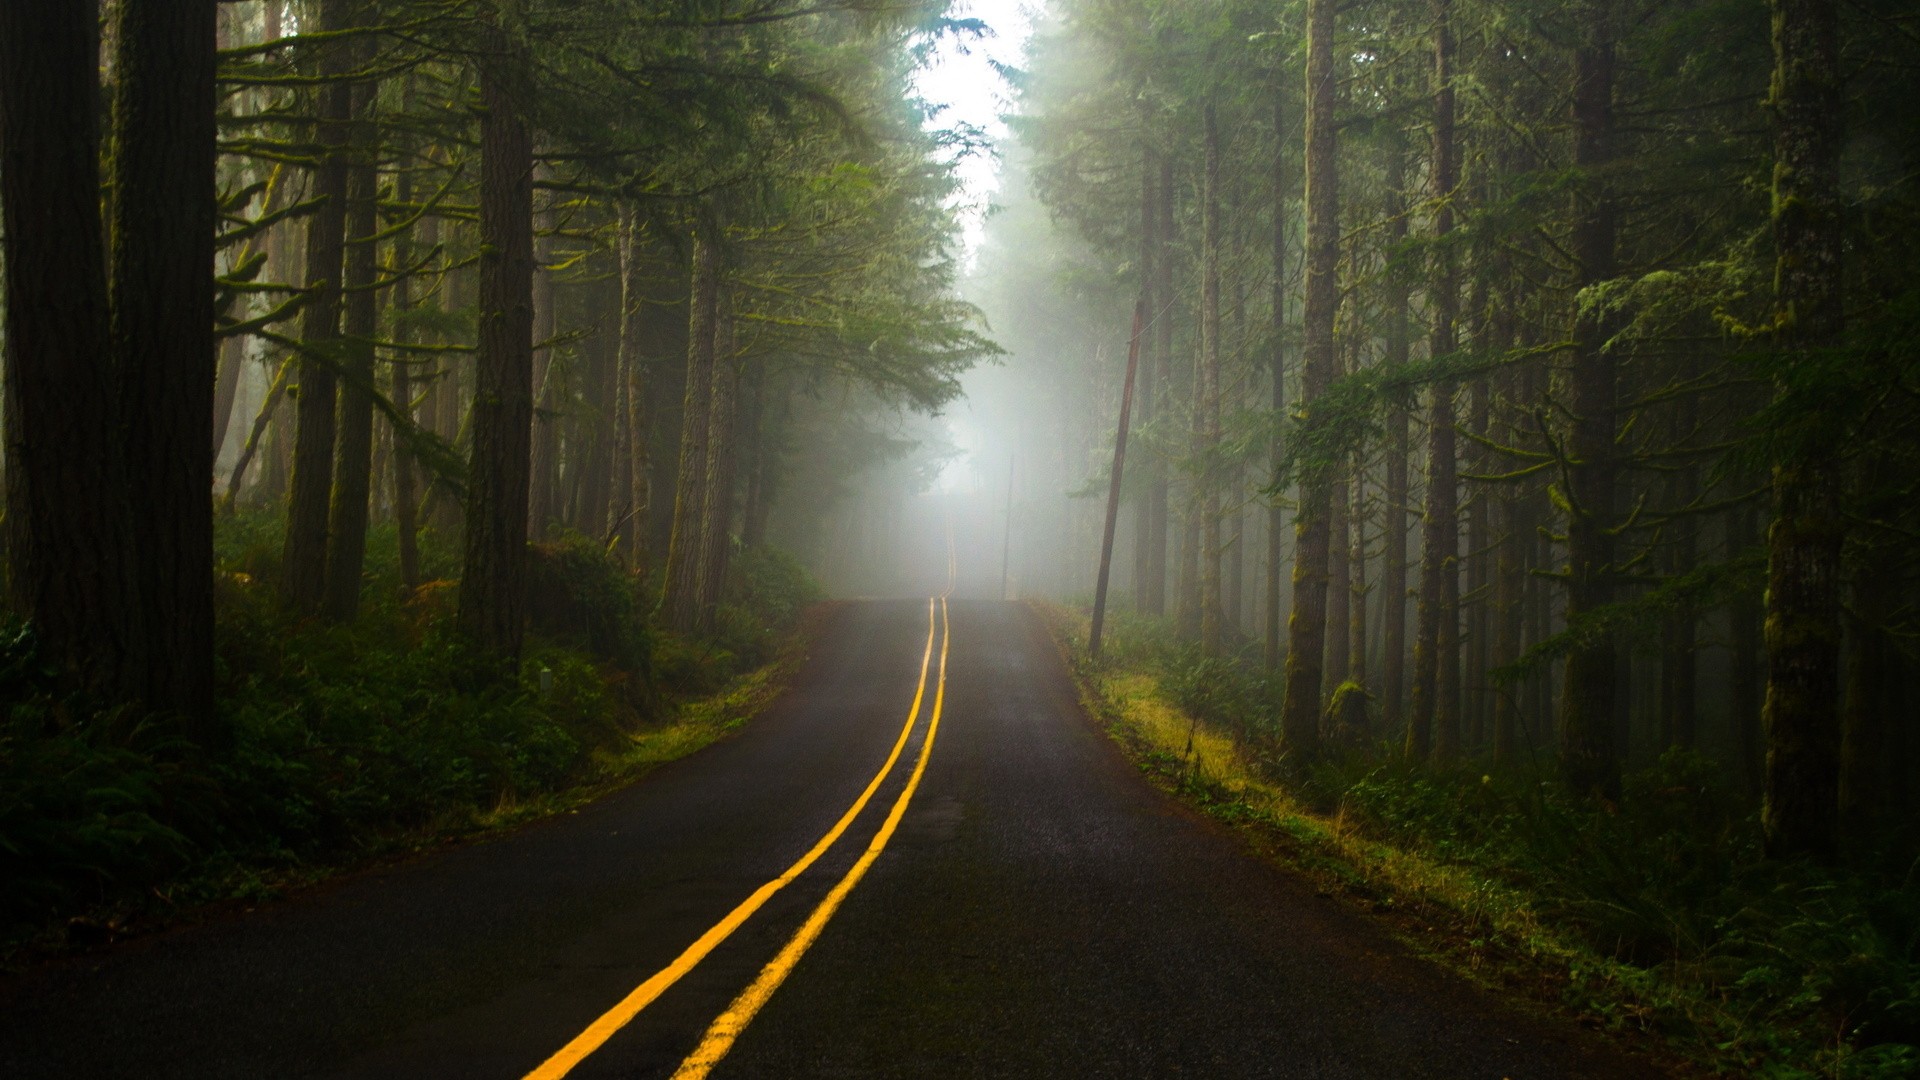 General 1920x1080 nature trees forest mist road plants grass branch lines hills yellow asphalt outdoors